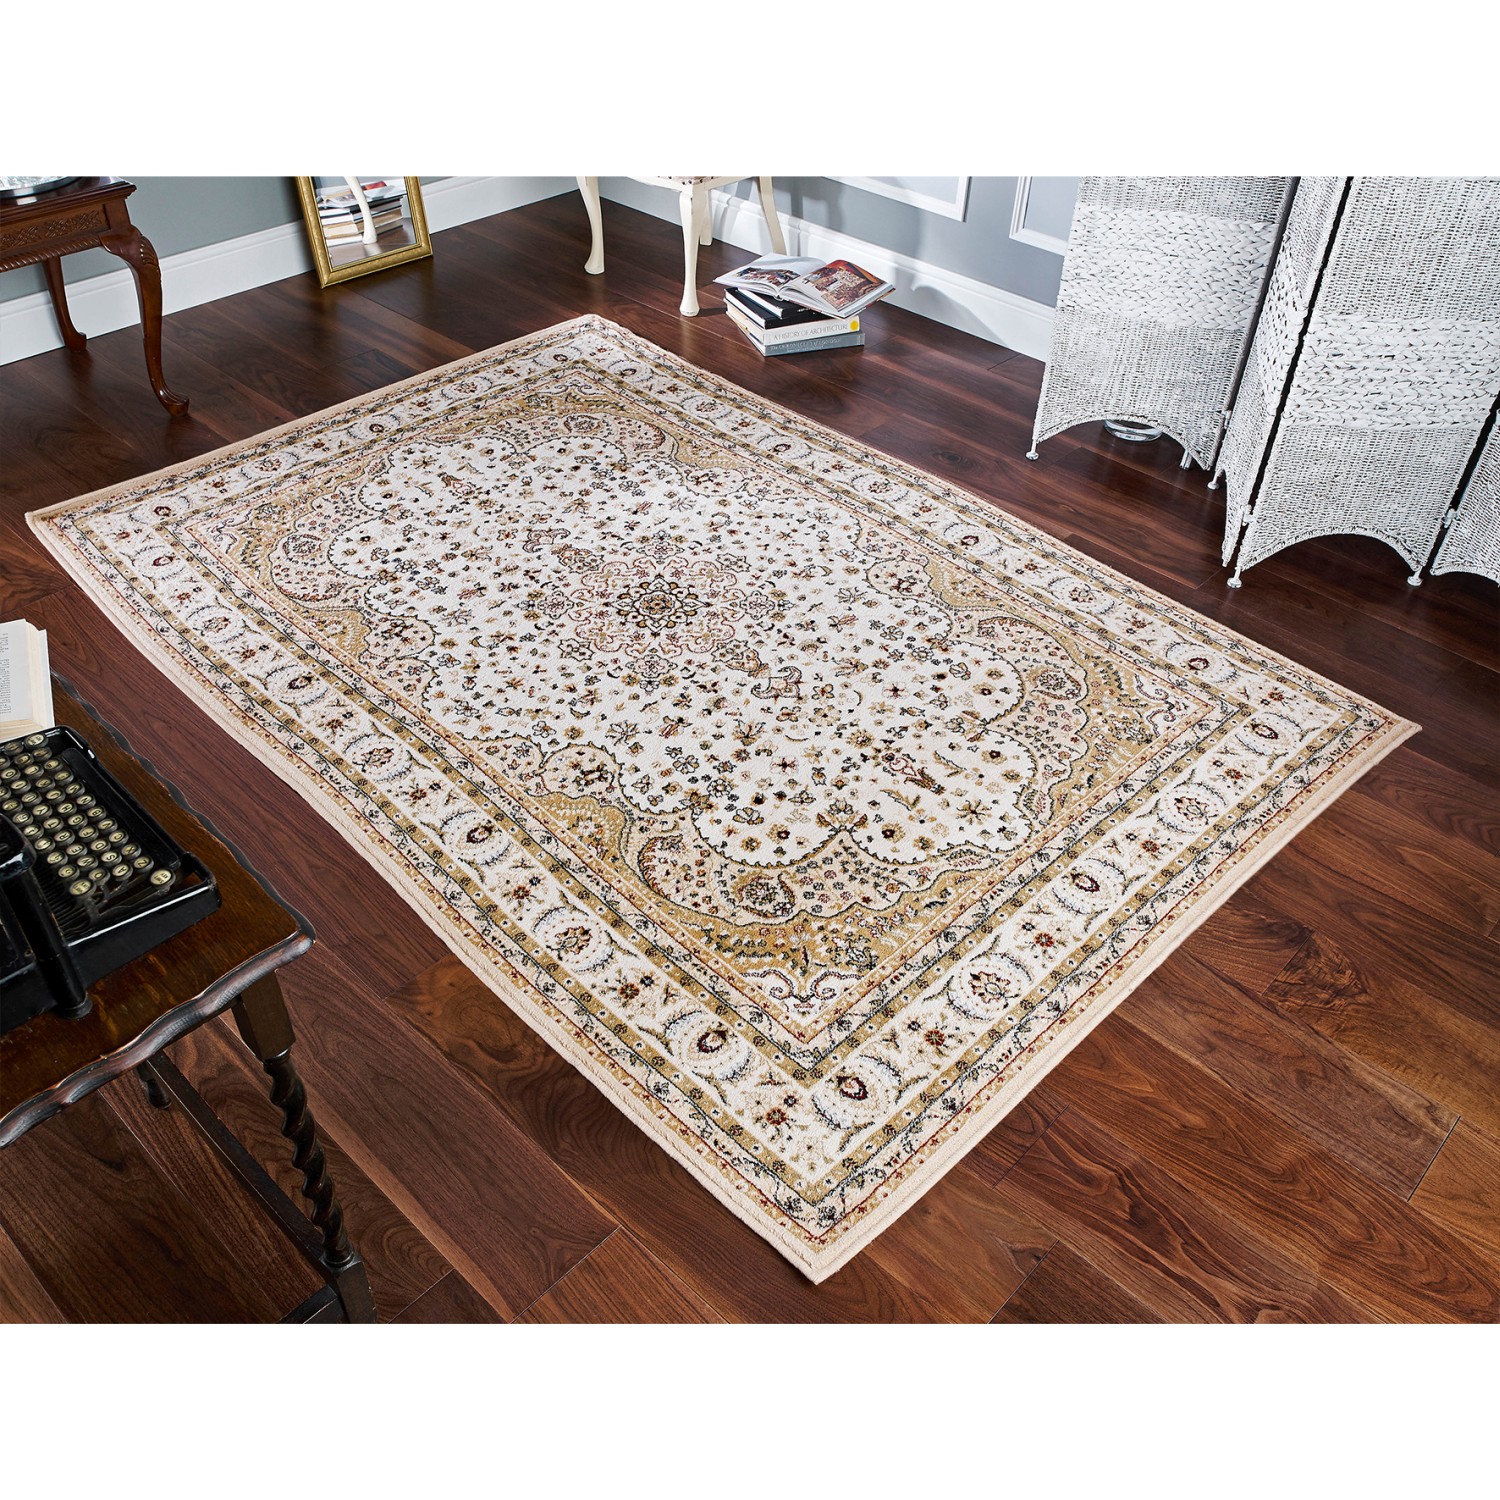 Royal Classic Traditional Rug - 217w Beige